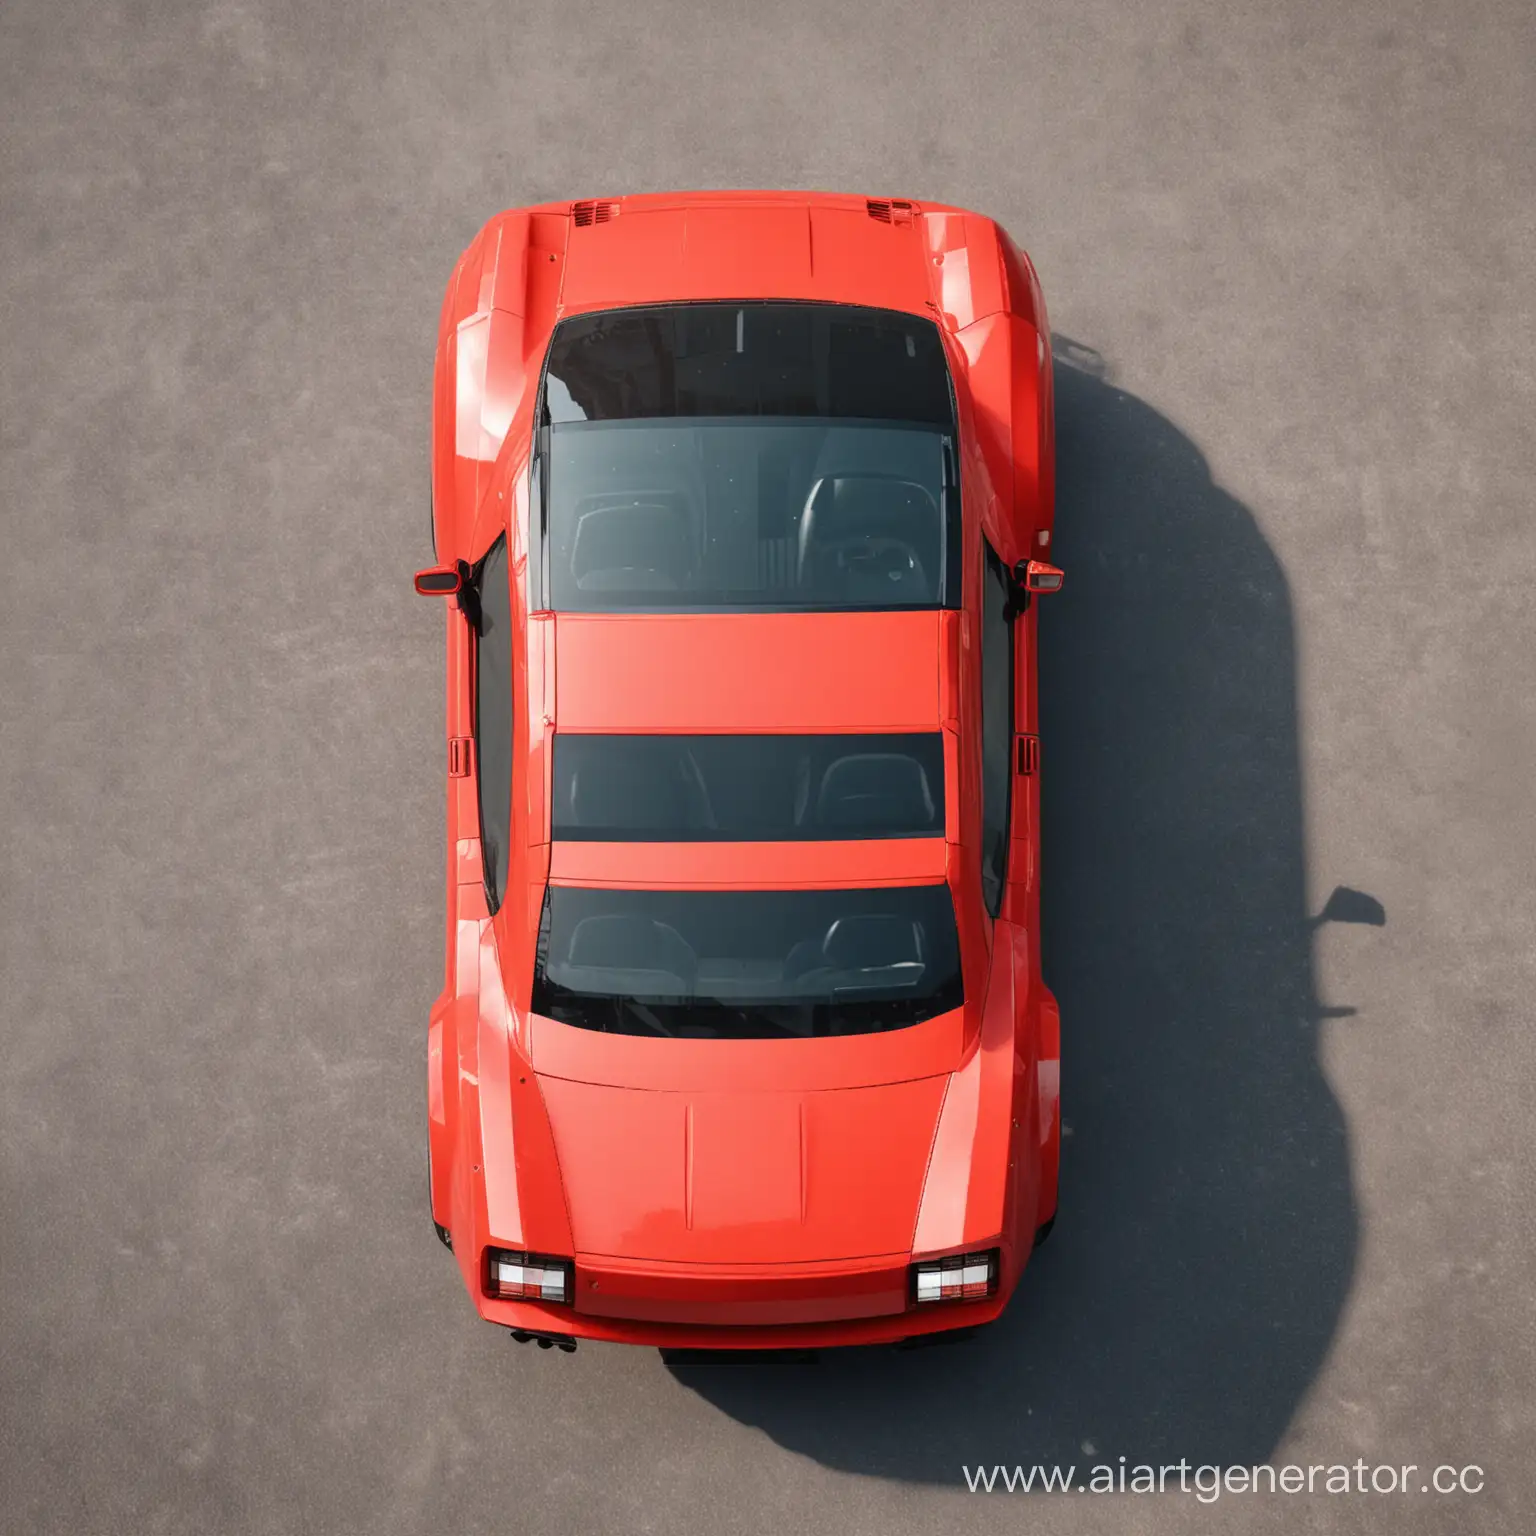 Top-View-Red-Car-Pixelated-Vehicle-with-Tilted-Perspective